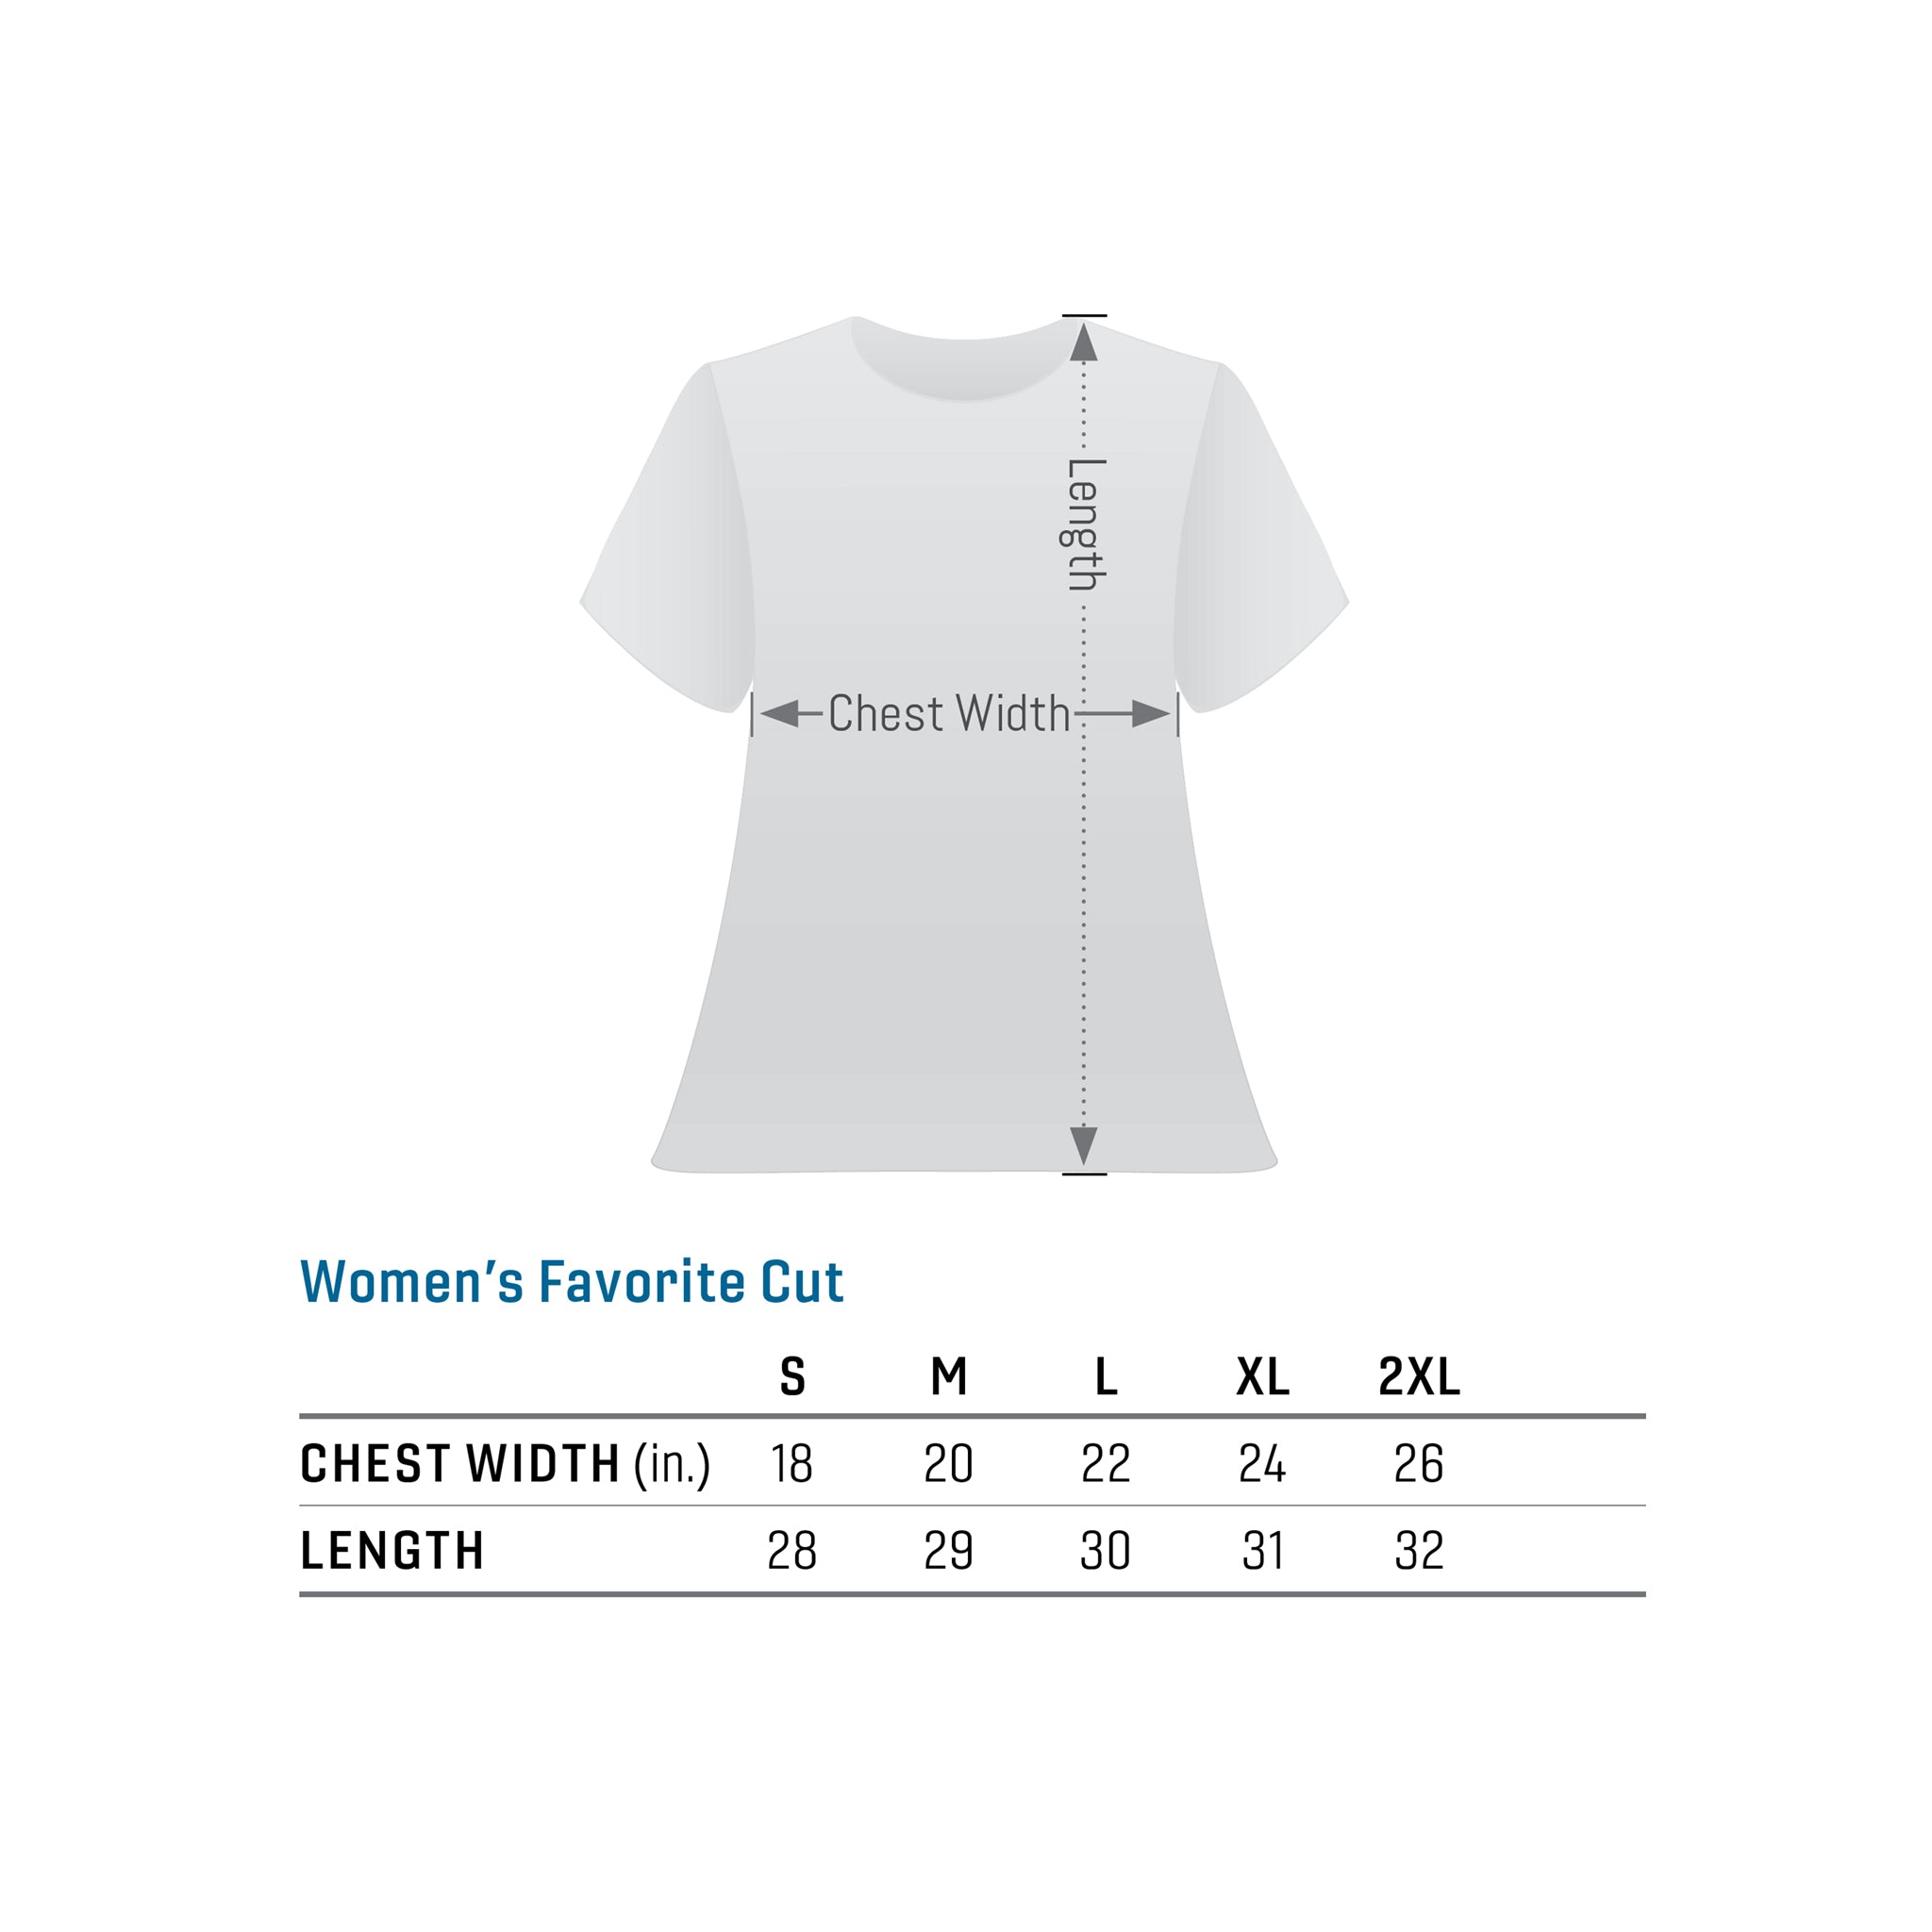 See the good. Be the Good. — women's favorite cut